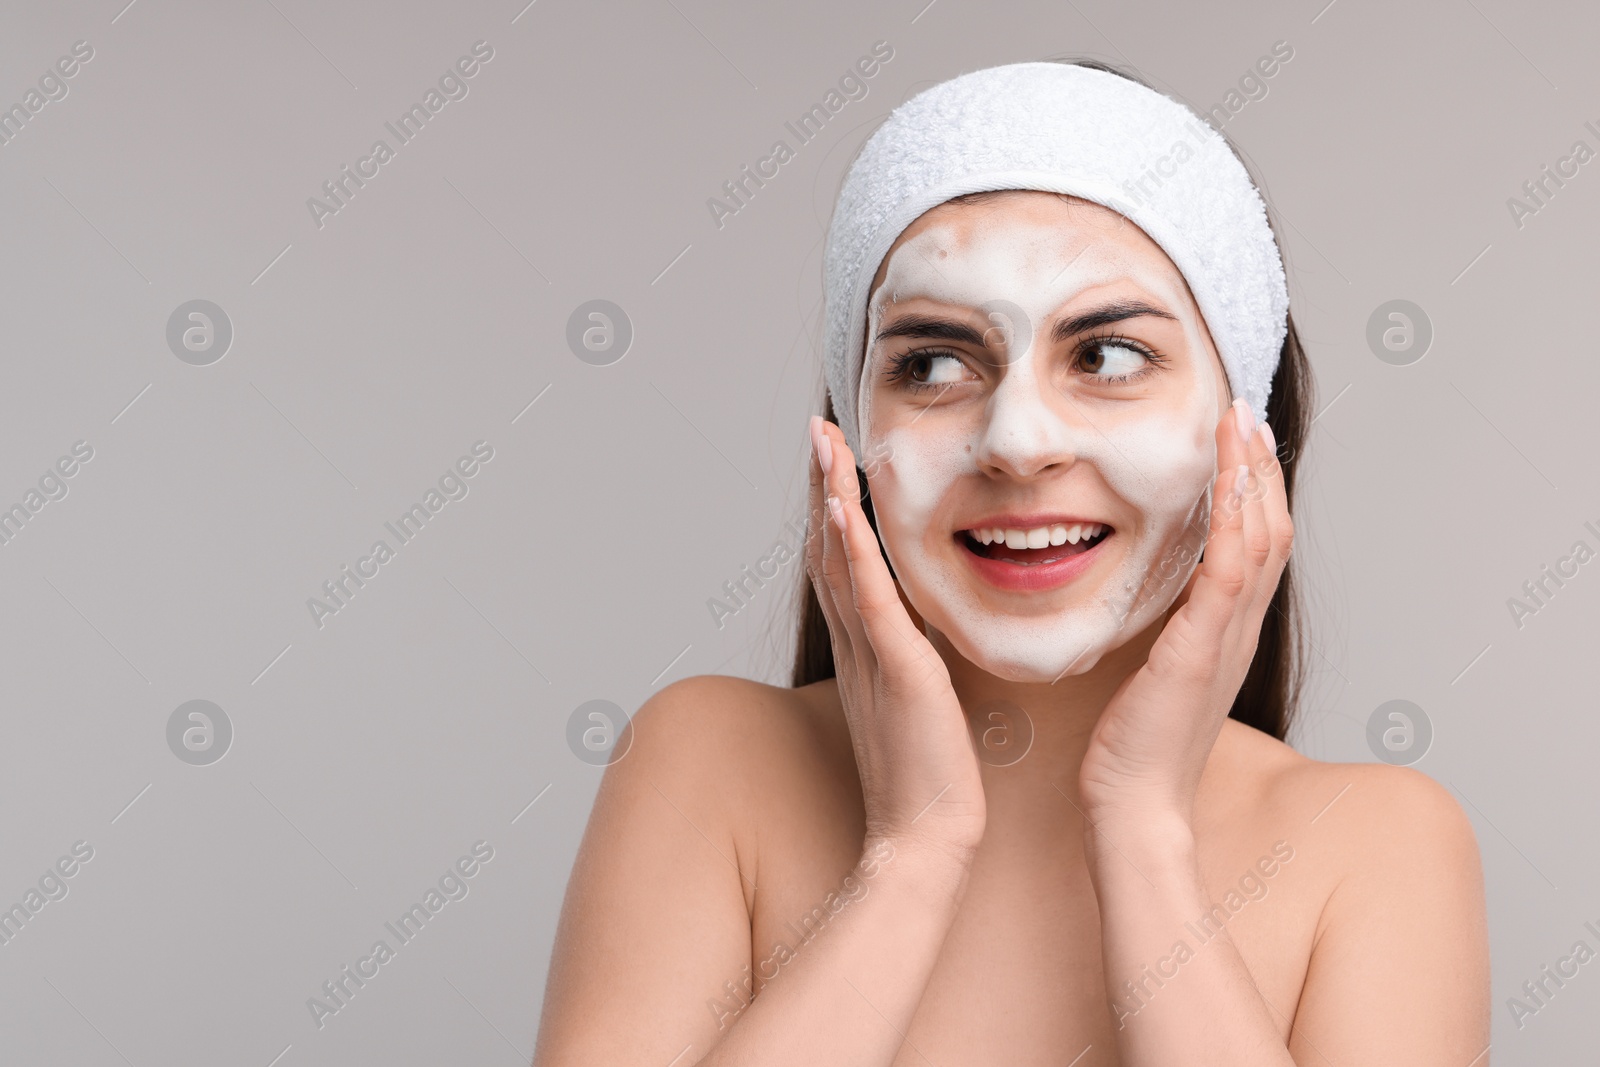 Photo of Young woman with headband washing her face on light grey background, space for text